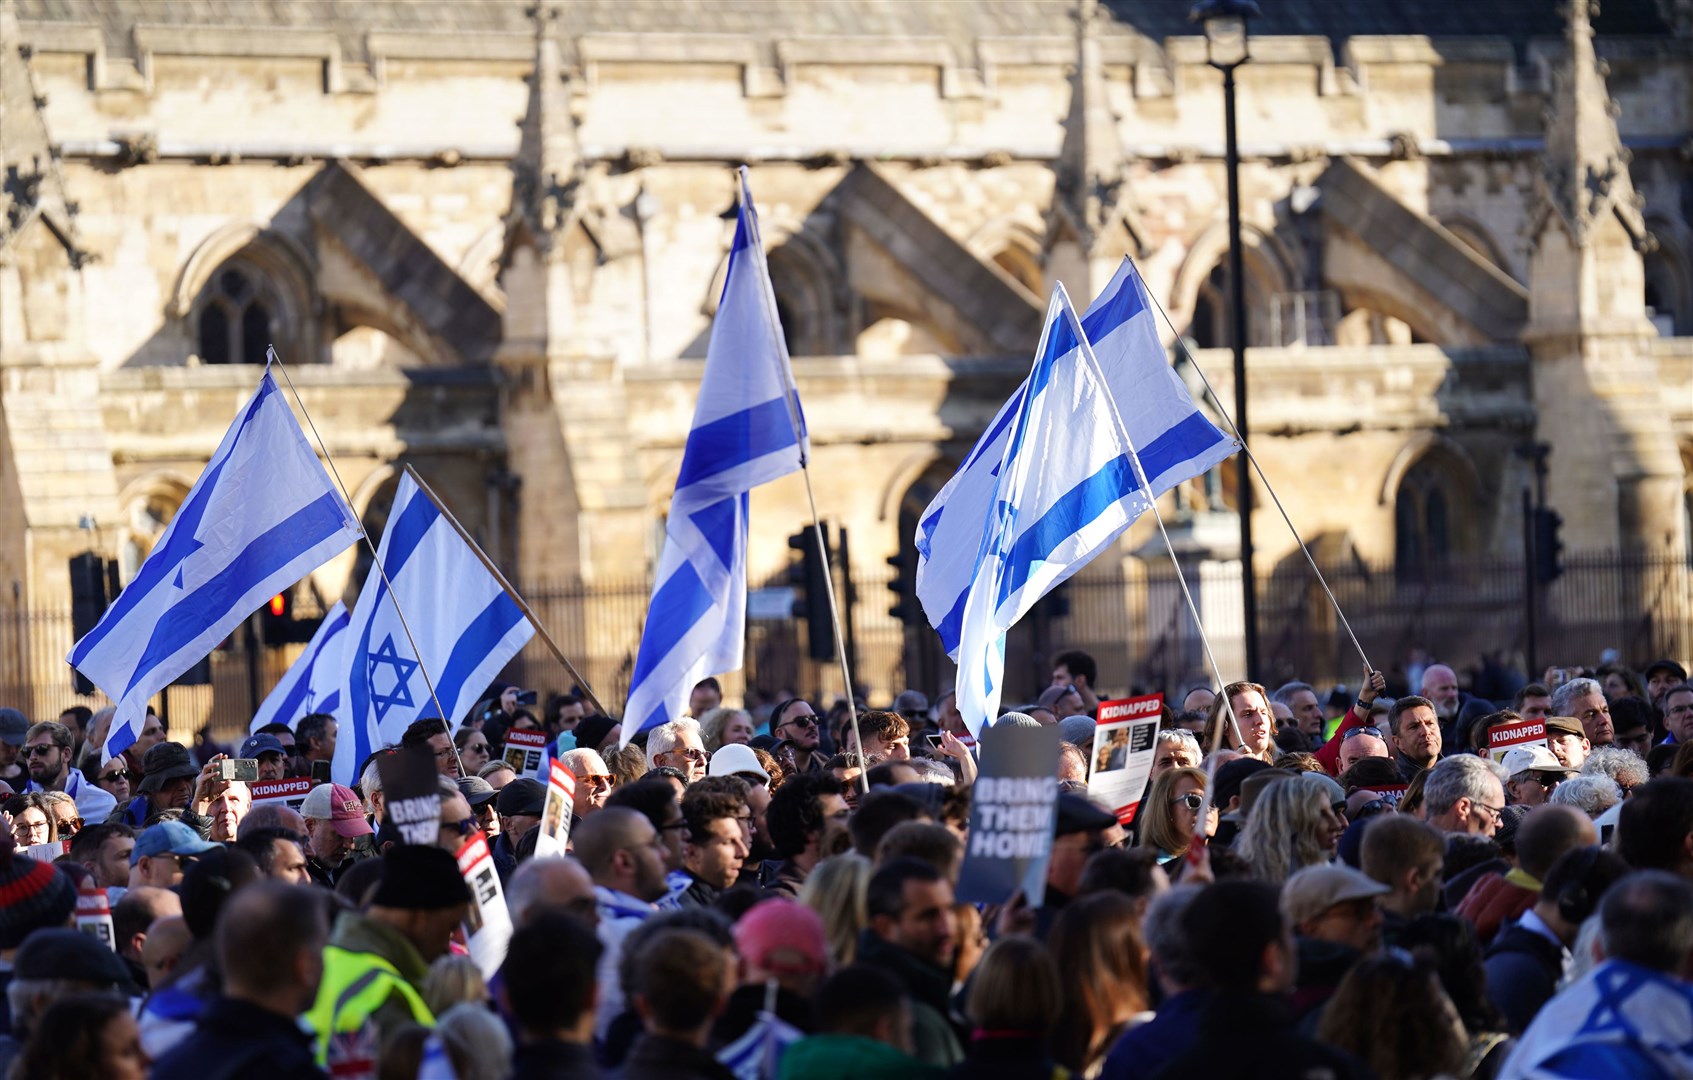 People wave Israeli flags at the vigil in Parliament Square (James Manning/PA)